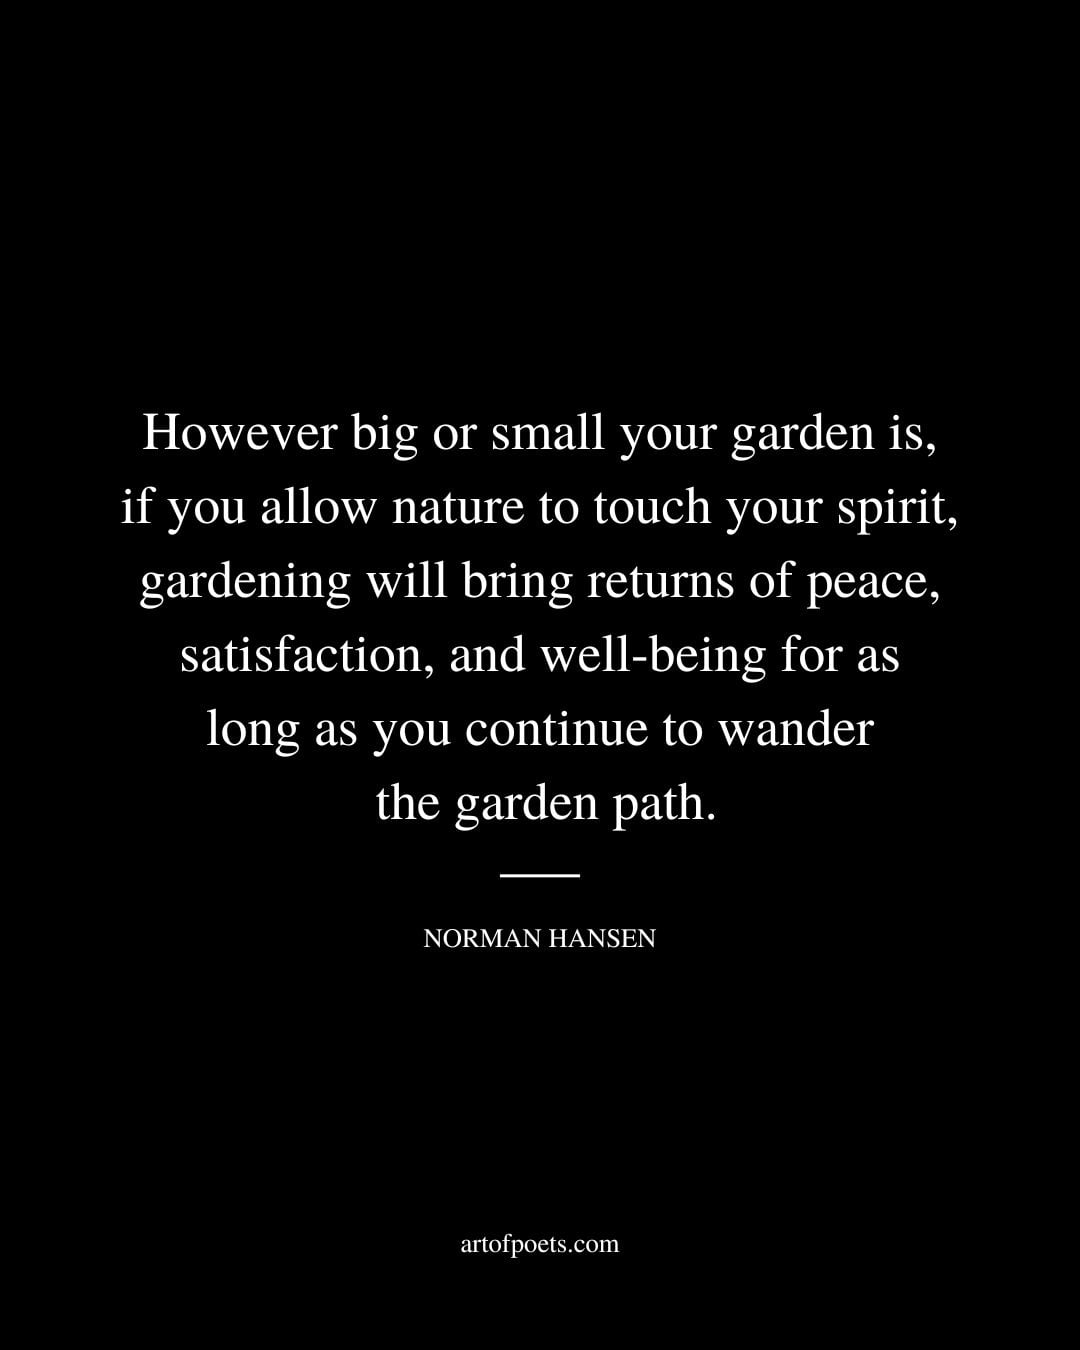 However big or small your garden is if you allow nature to touch your spirit gardening will bring returns of peace satisfaction 1